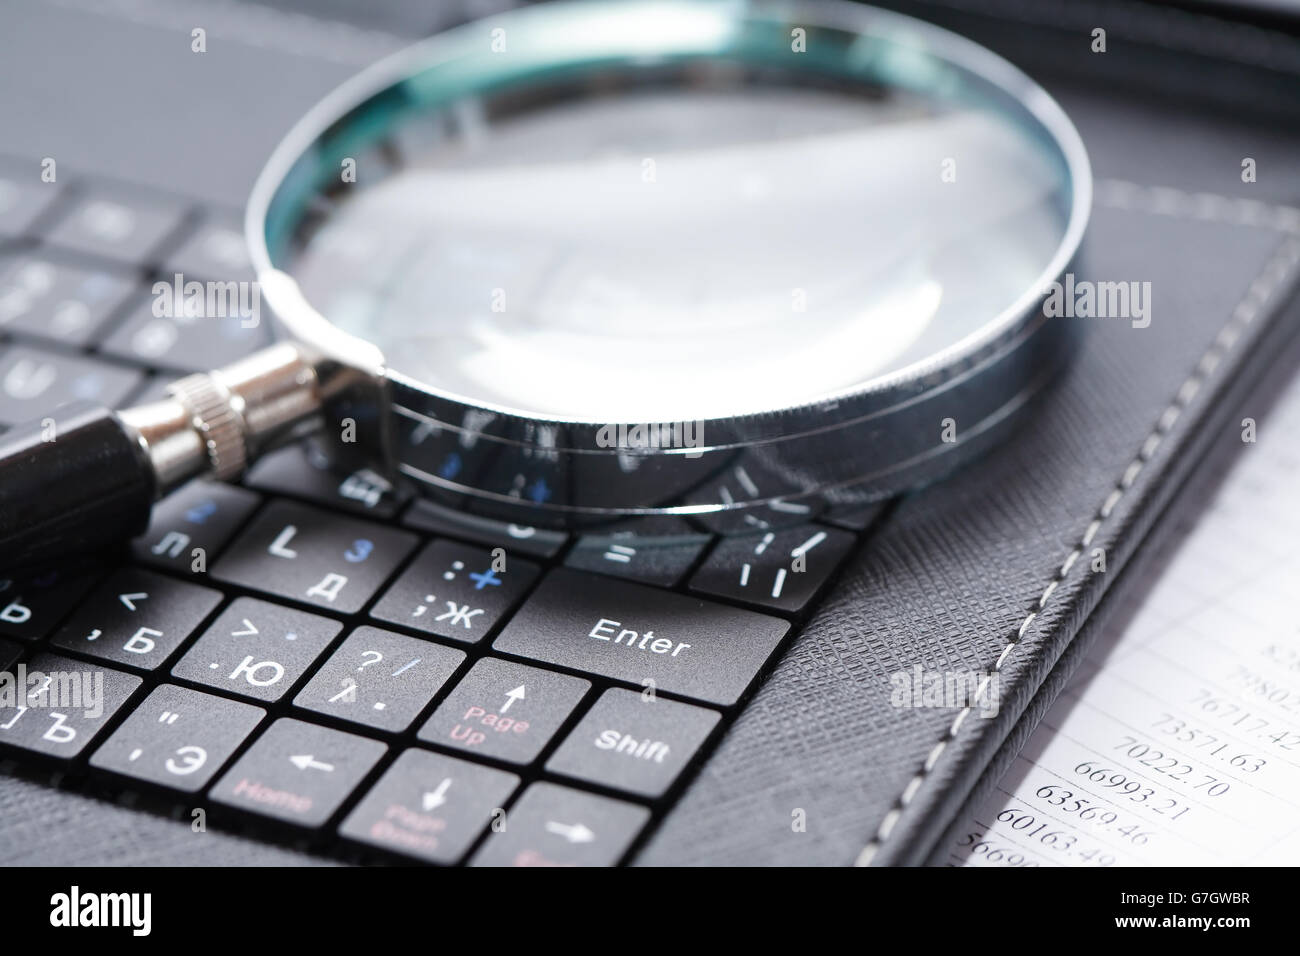 Magnifying lens on the laptop keyboard Stock Photo by ©nazarenko